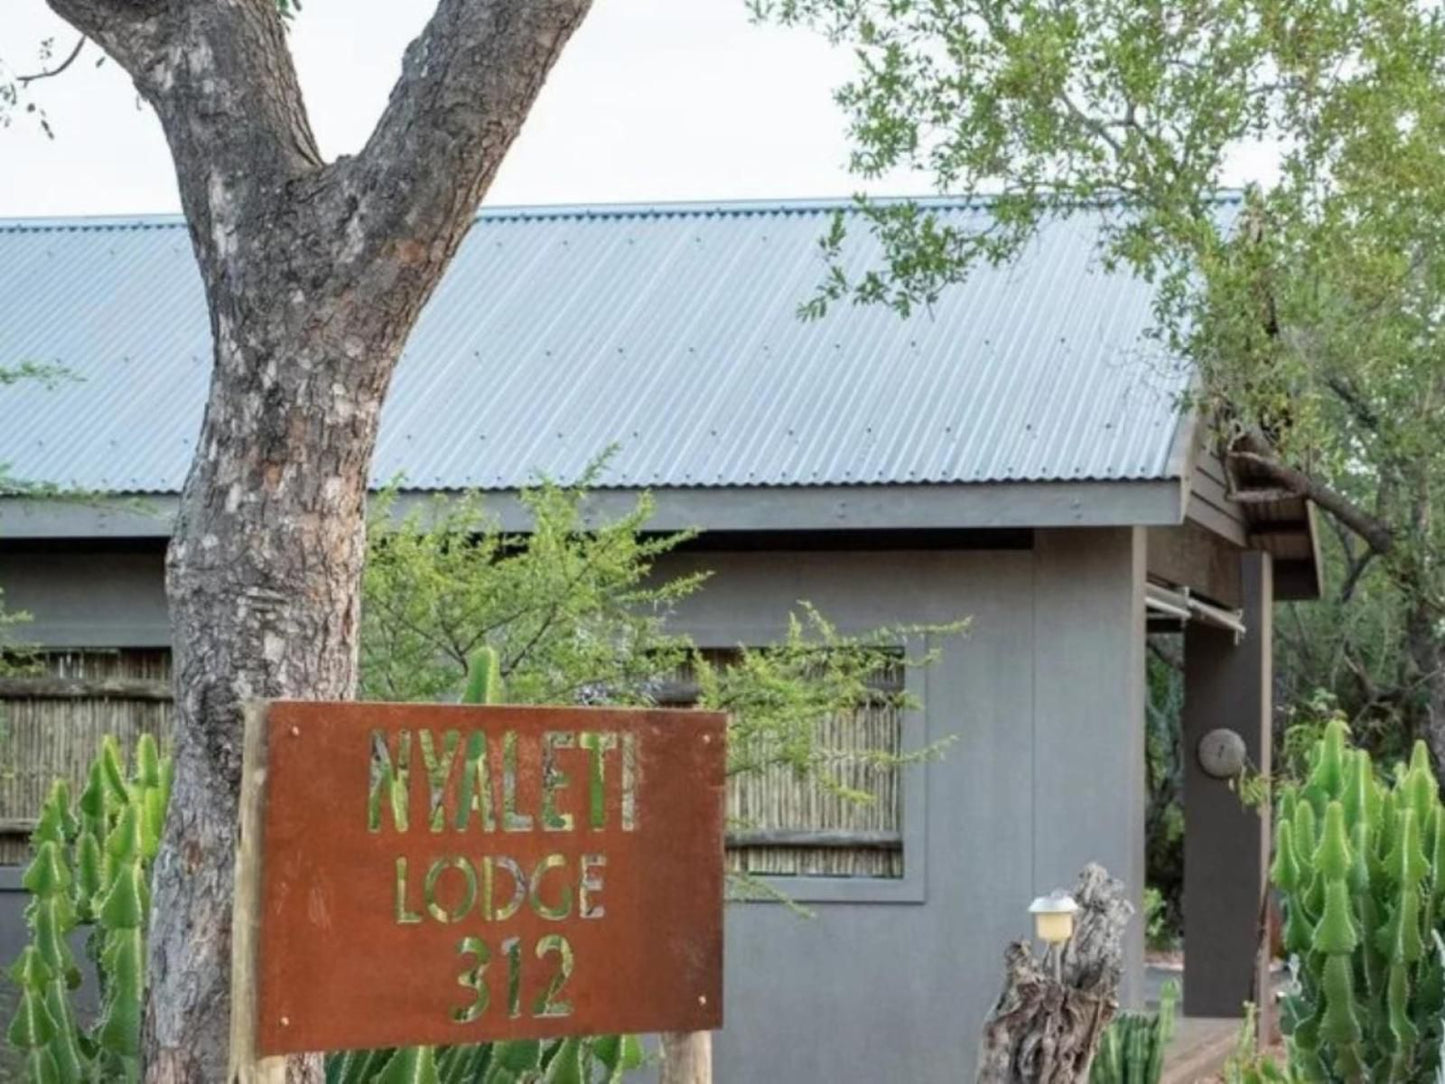 Nyaleti Lodge Hoedspruit Limpopo Province South Africa Building, Architecture, Cabin, Sign